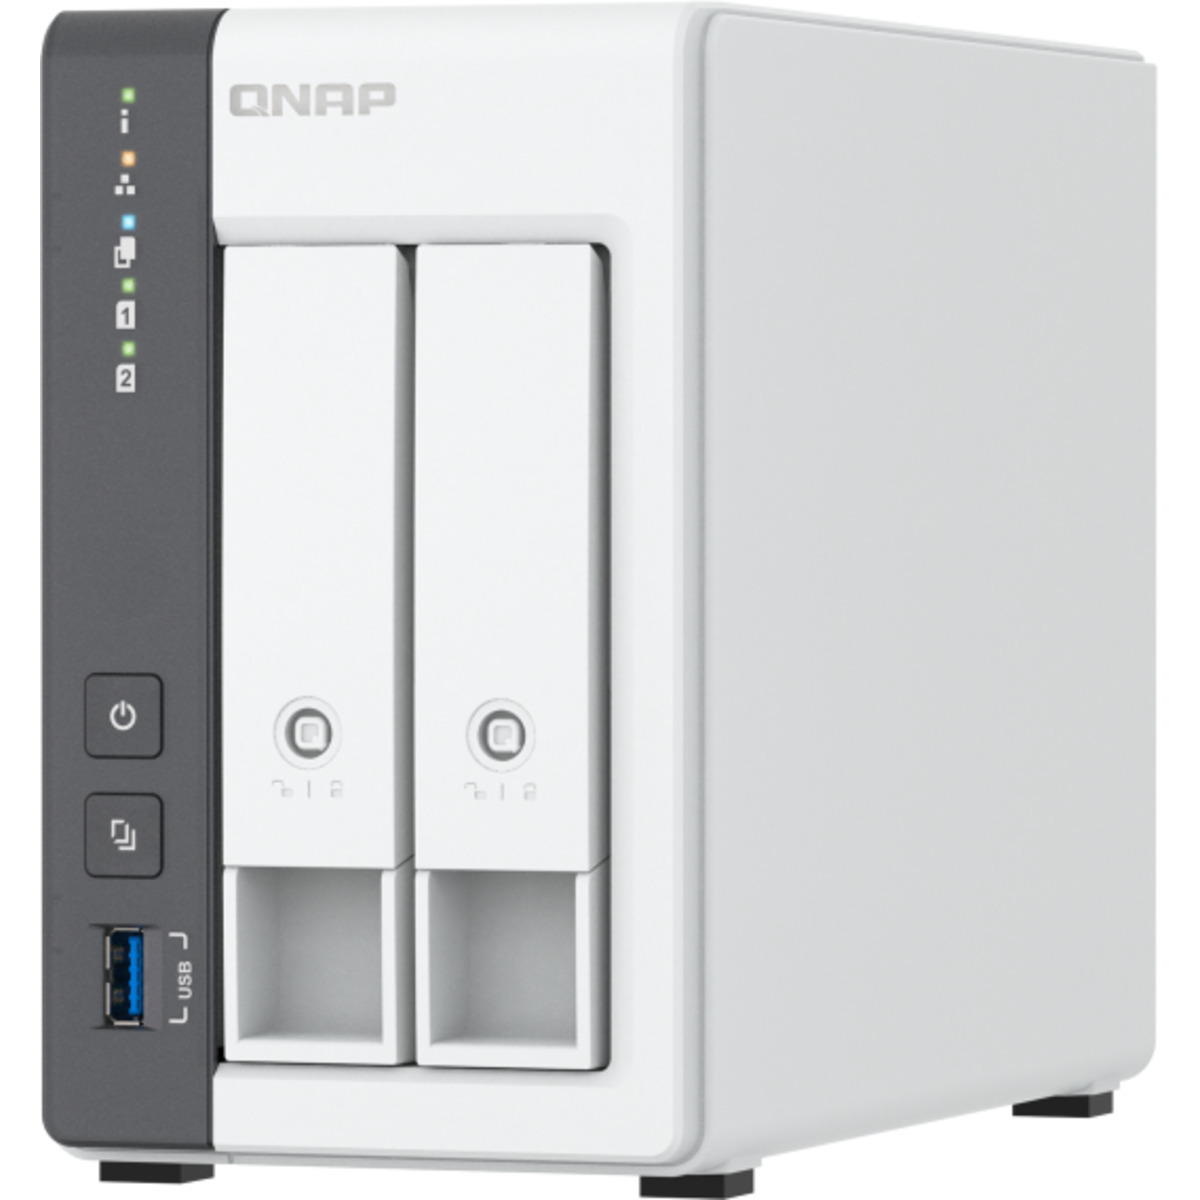 QNAP TS-216G 4tb 2-Bay Desktop Personal / Basic Home / Small Office NAS - Network Attached Storage Device 2x2tb Sandisk Ultra 3D SDSSDH3-2T00 2.5 560/520MB/s SATA 6Gb/s SSD CONSUMER Class Drives Installed - Burn-In Tested TS-216G